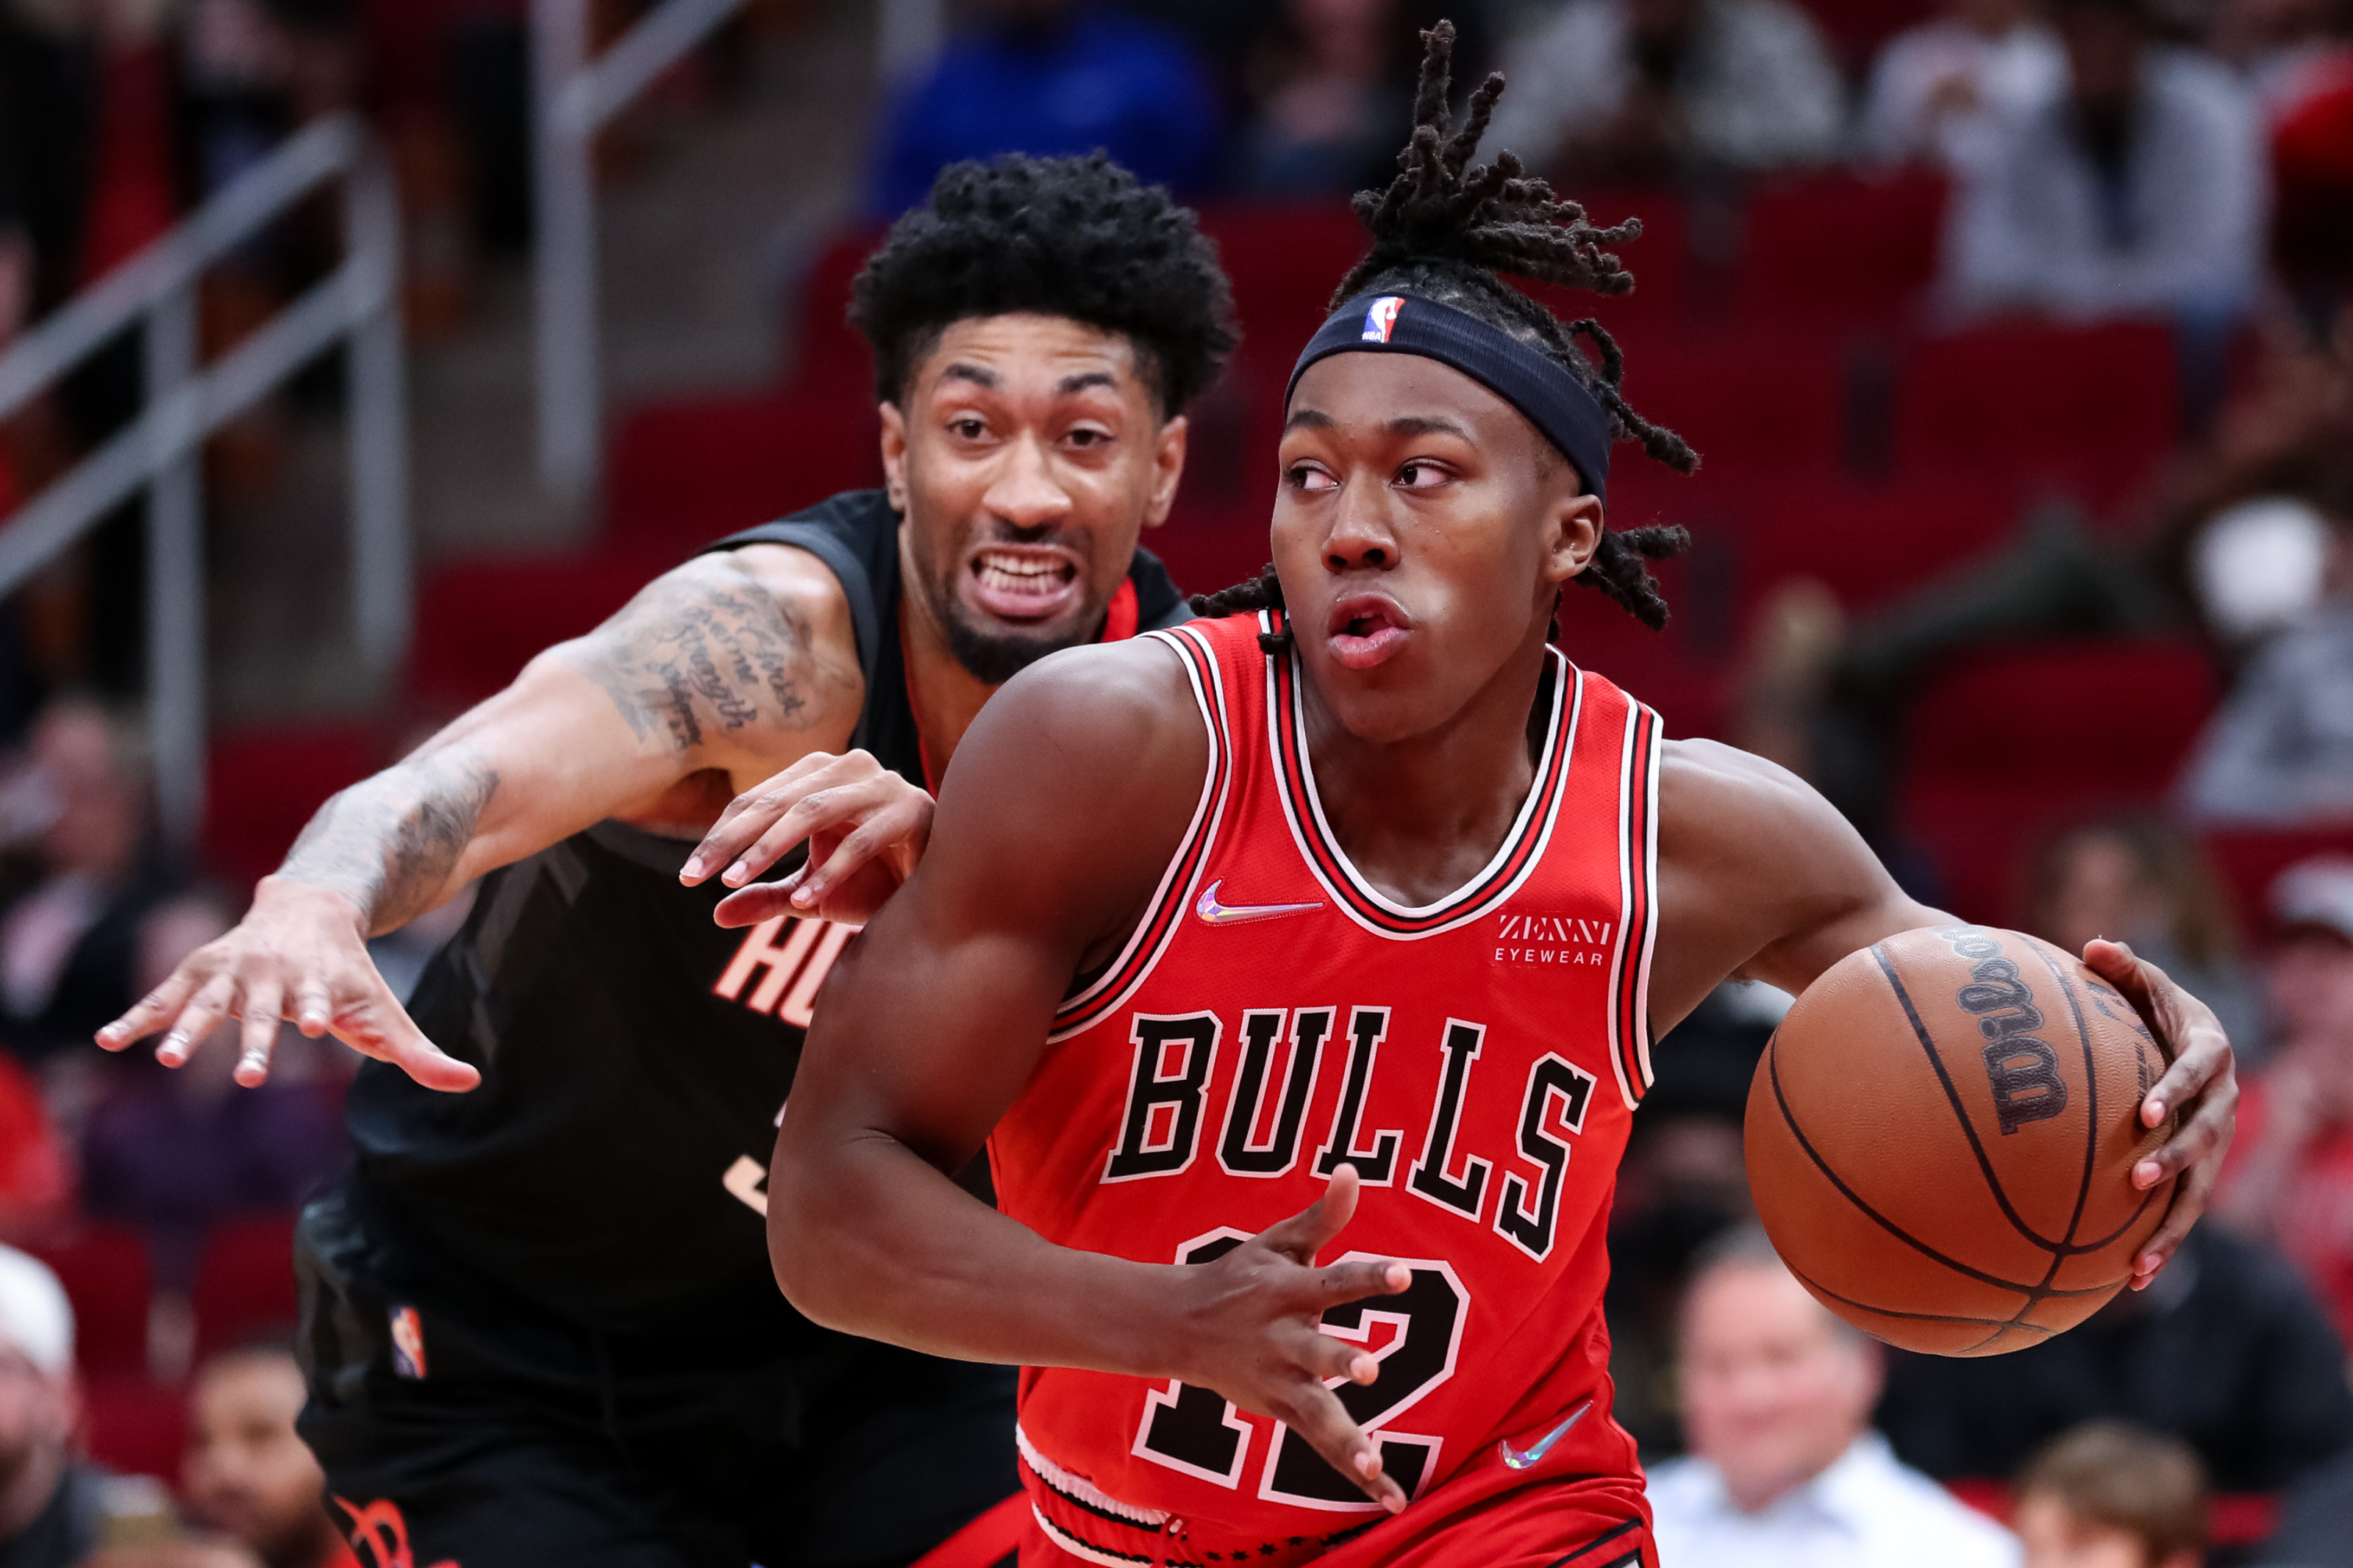 Ayo Dosunmu: The guard and Chicago native is returning to the Bulls